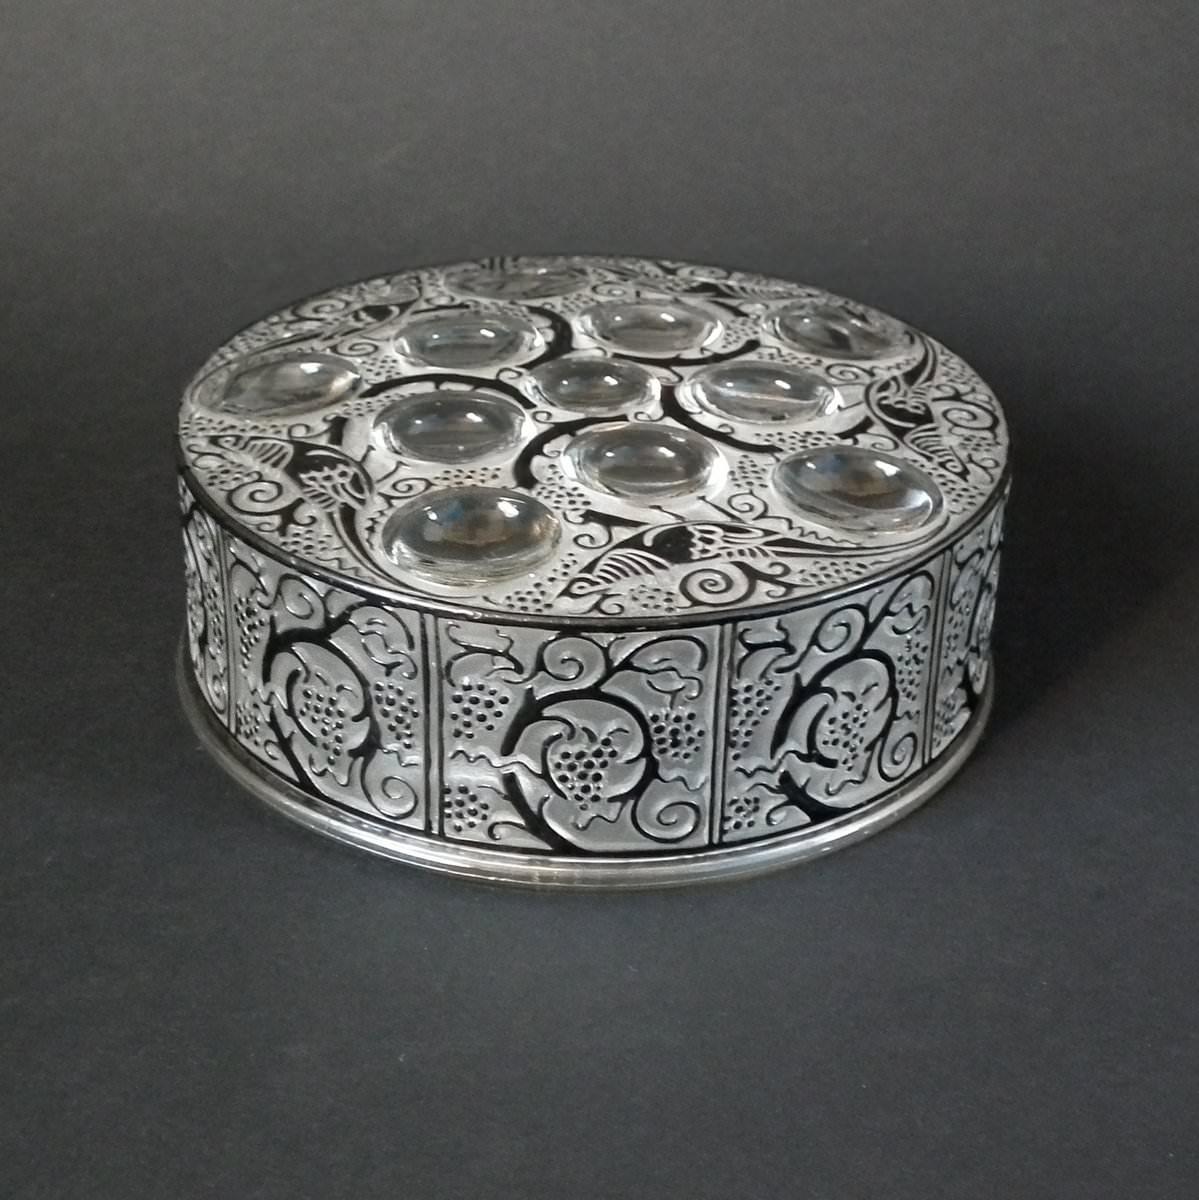 Rene Lalique clear and frosted glass box, with black enameled details. 'Roger' pattern, features stylized fruiting trees and exotic birds. Moulded makers mark, 'Lalique'. Engraved, 'R Lalique France' to underside rim of the lid. Book reference: